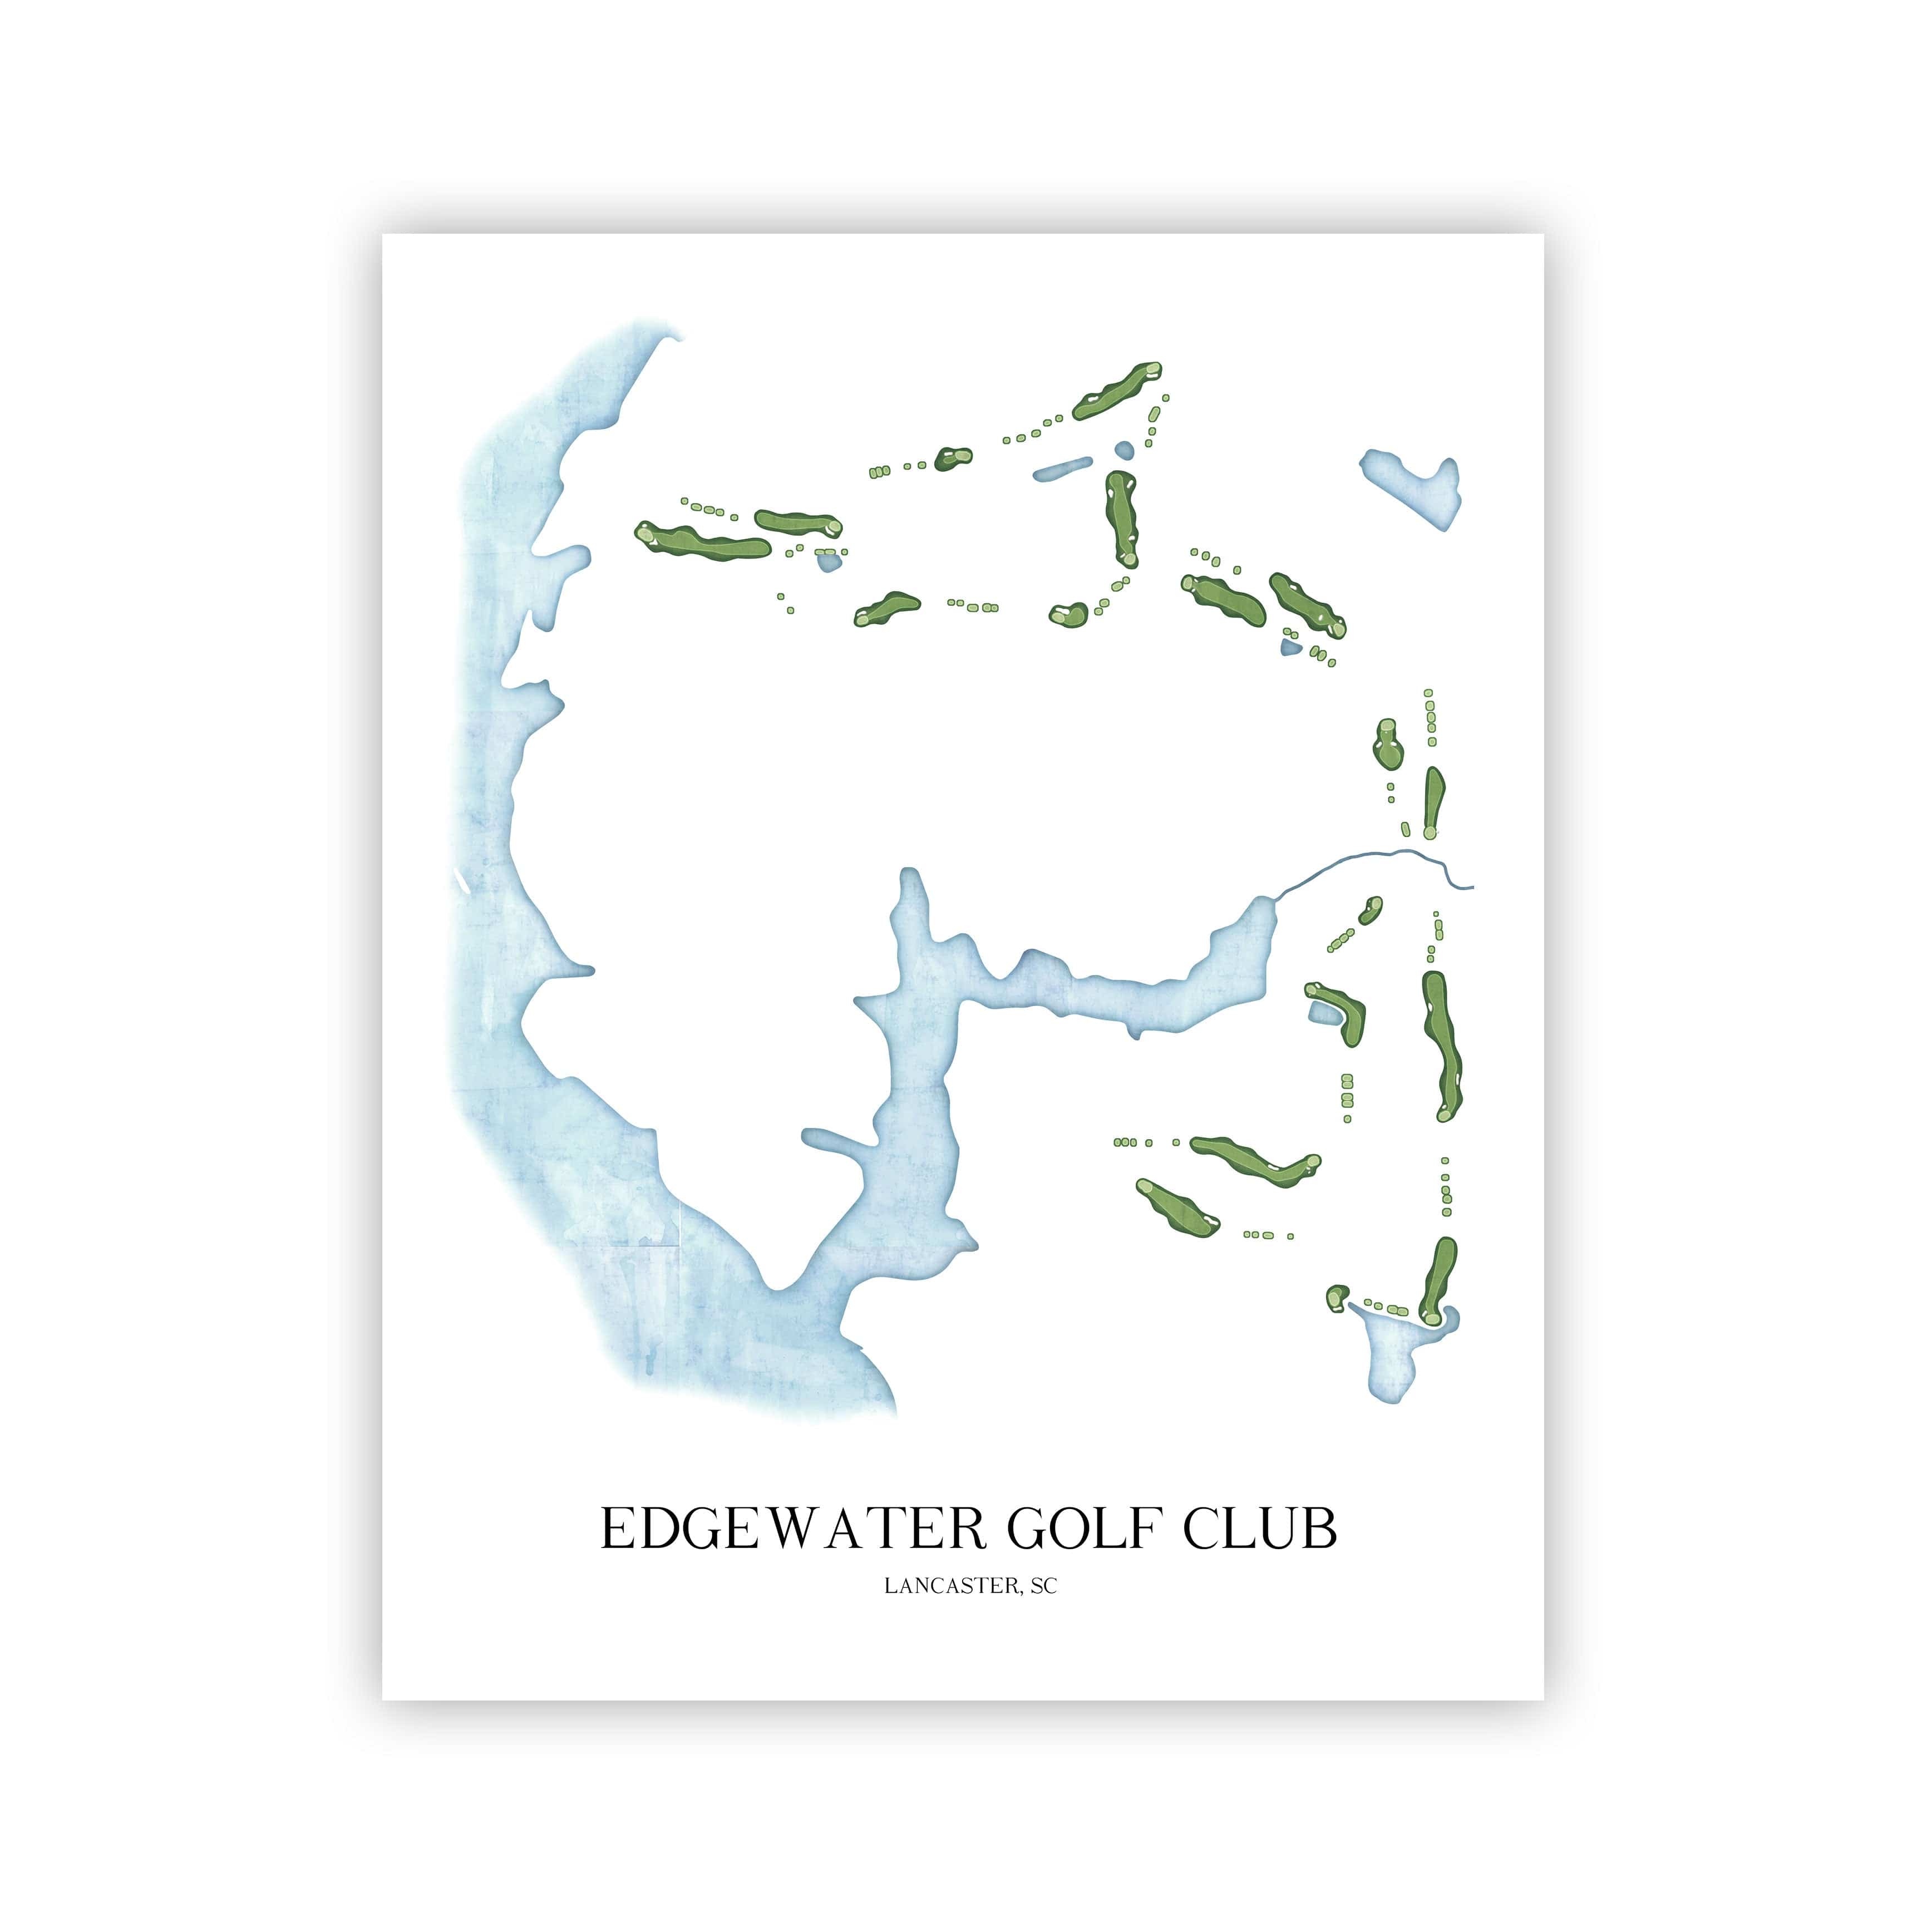 The 19th Hole Golf Shop - Golf Course Prints -  Edgewater Golf Club Golf Course Map